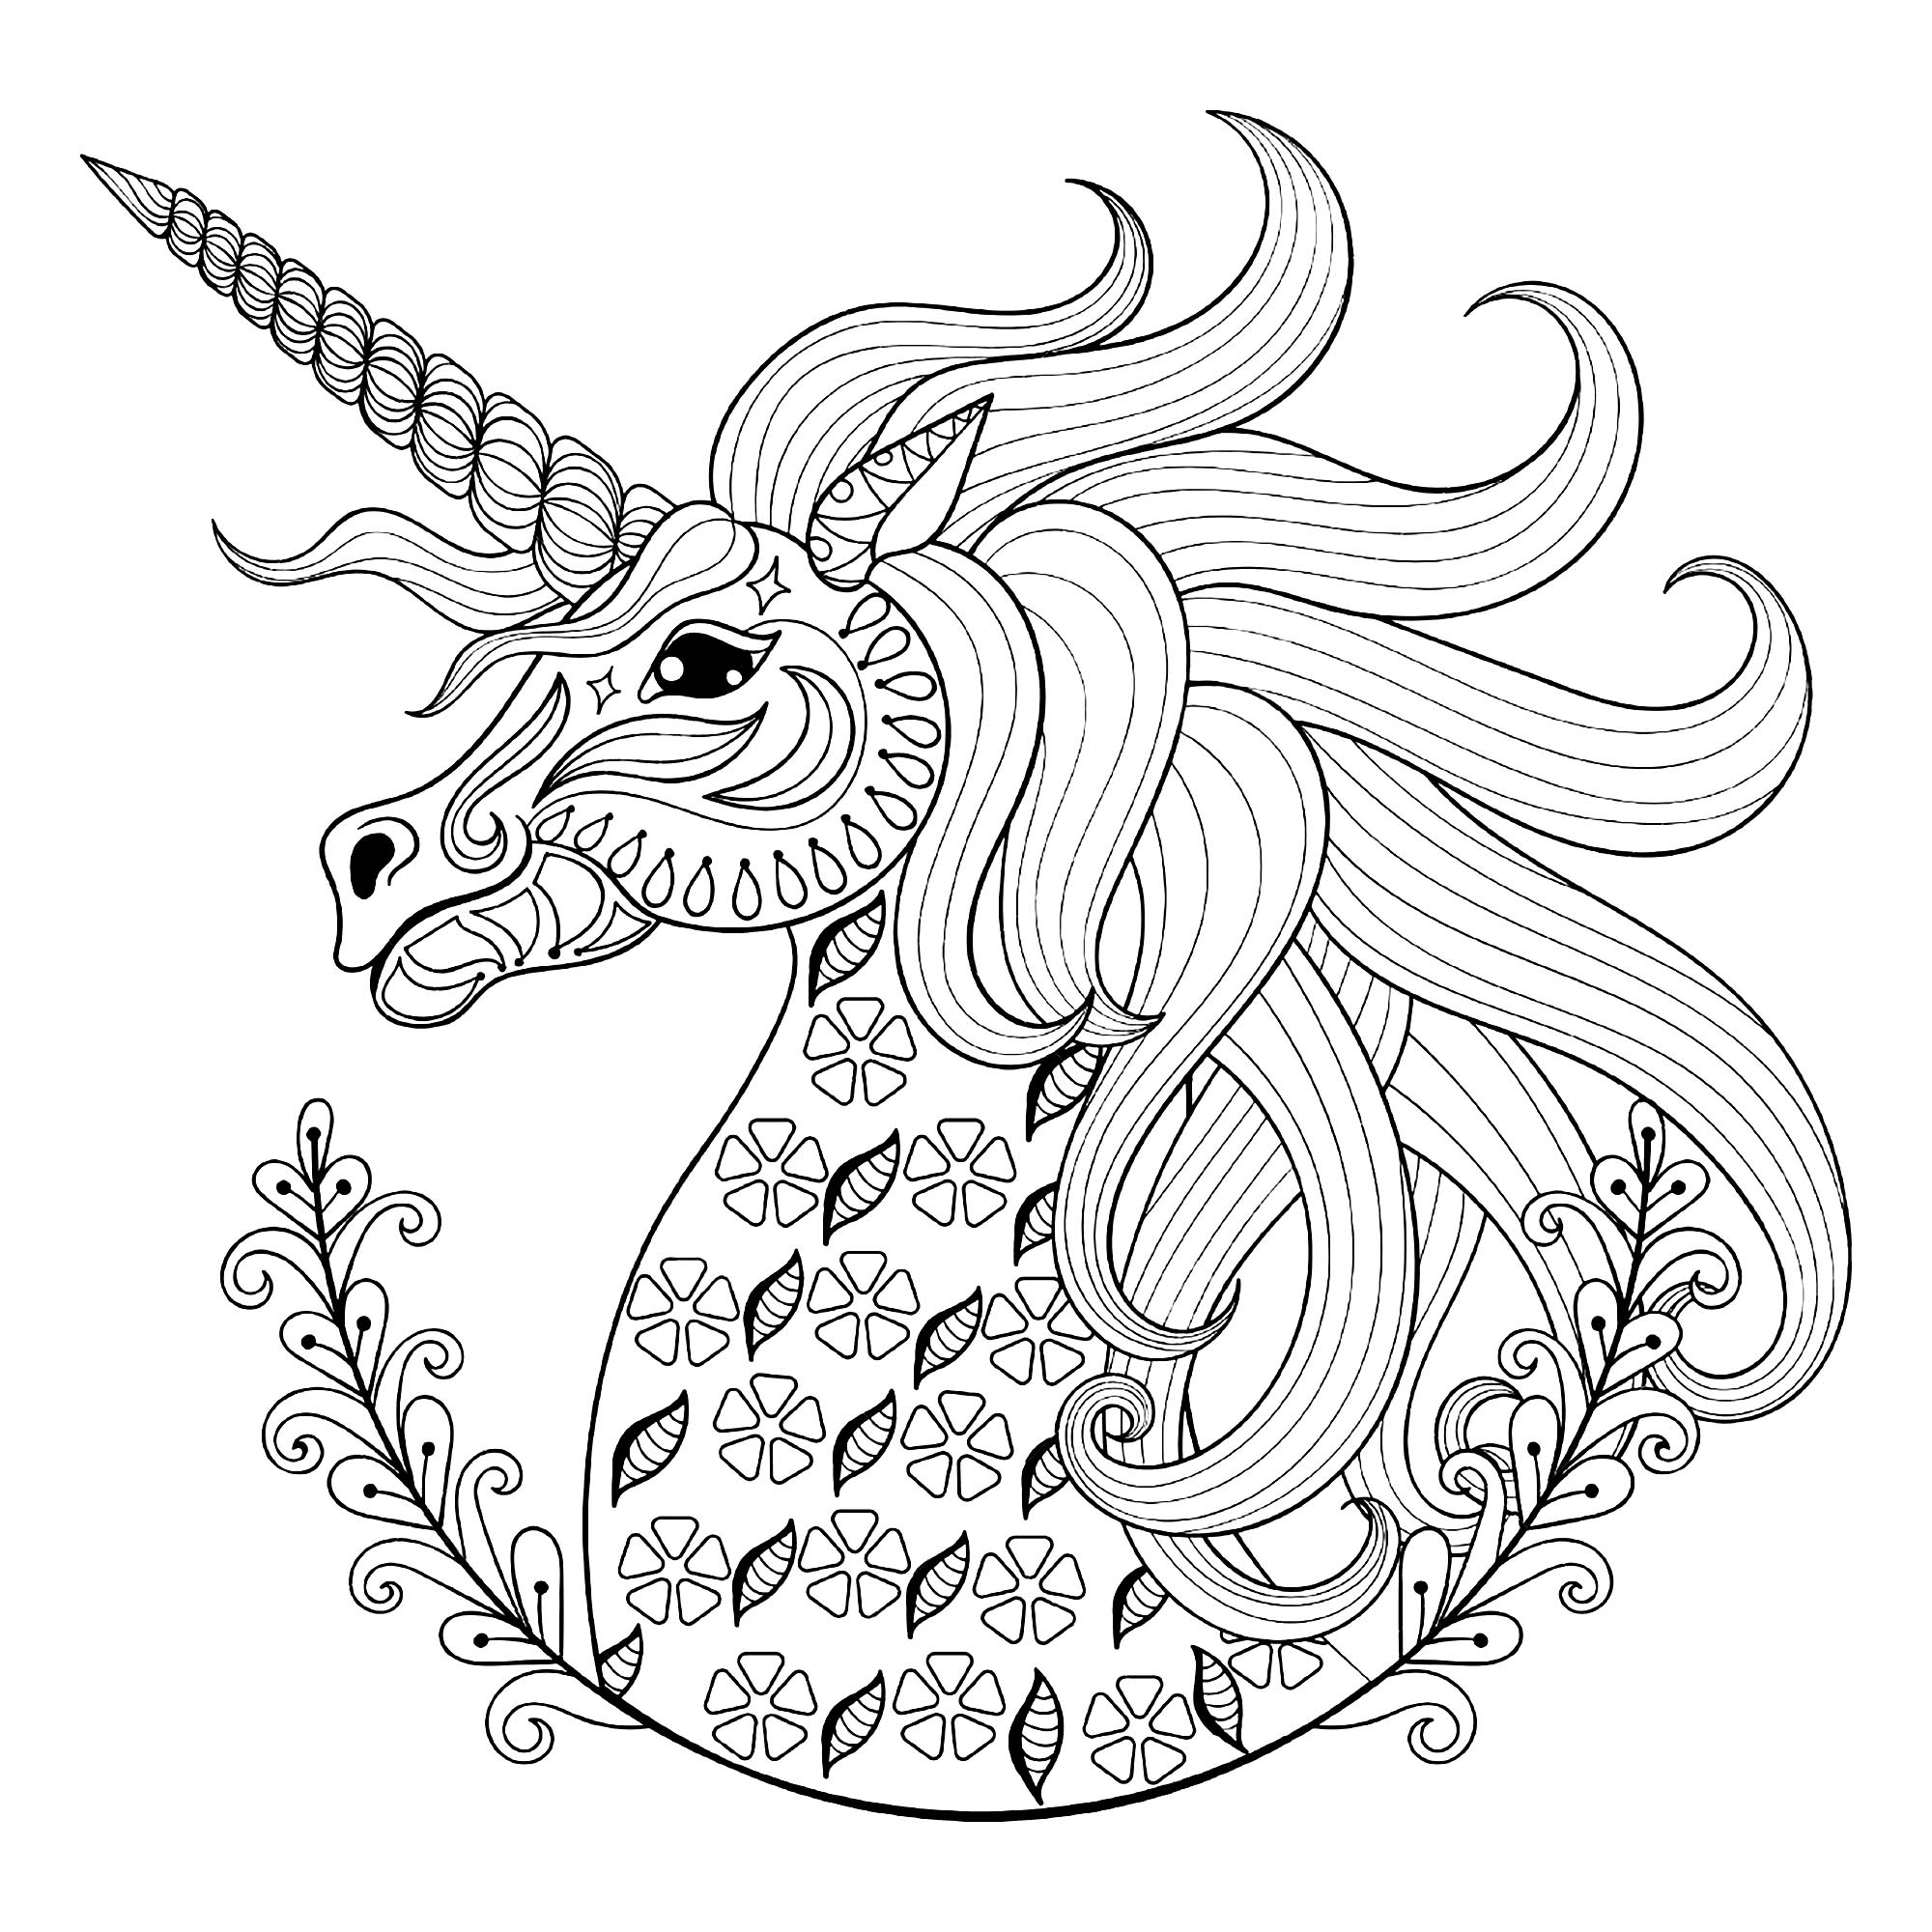 Fun unicorn coloring pages to print and color